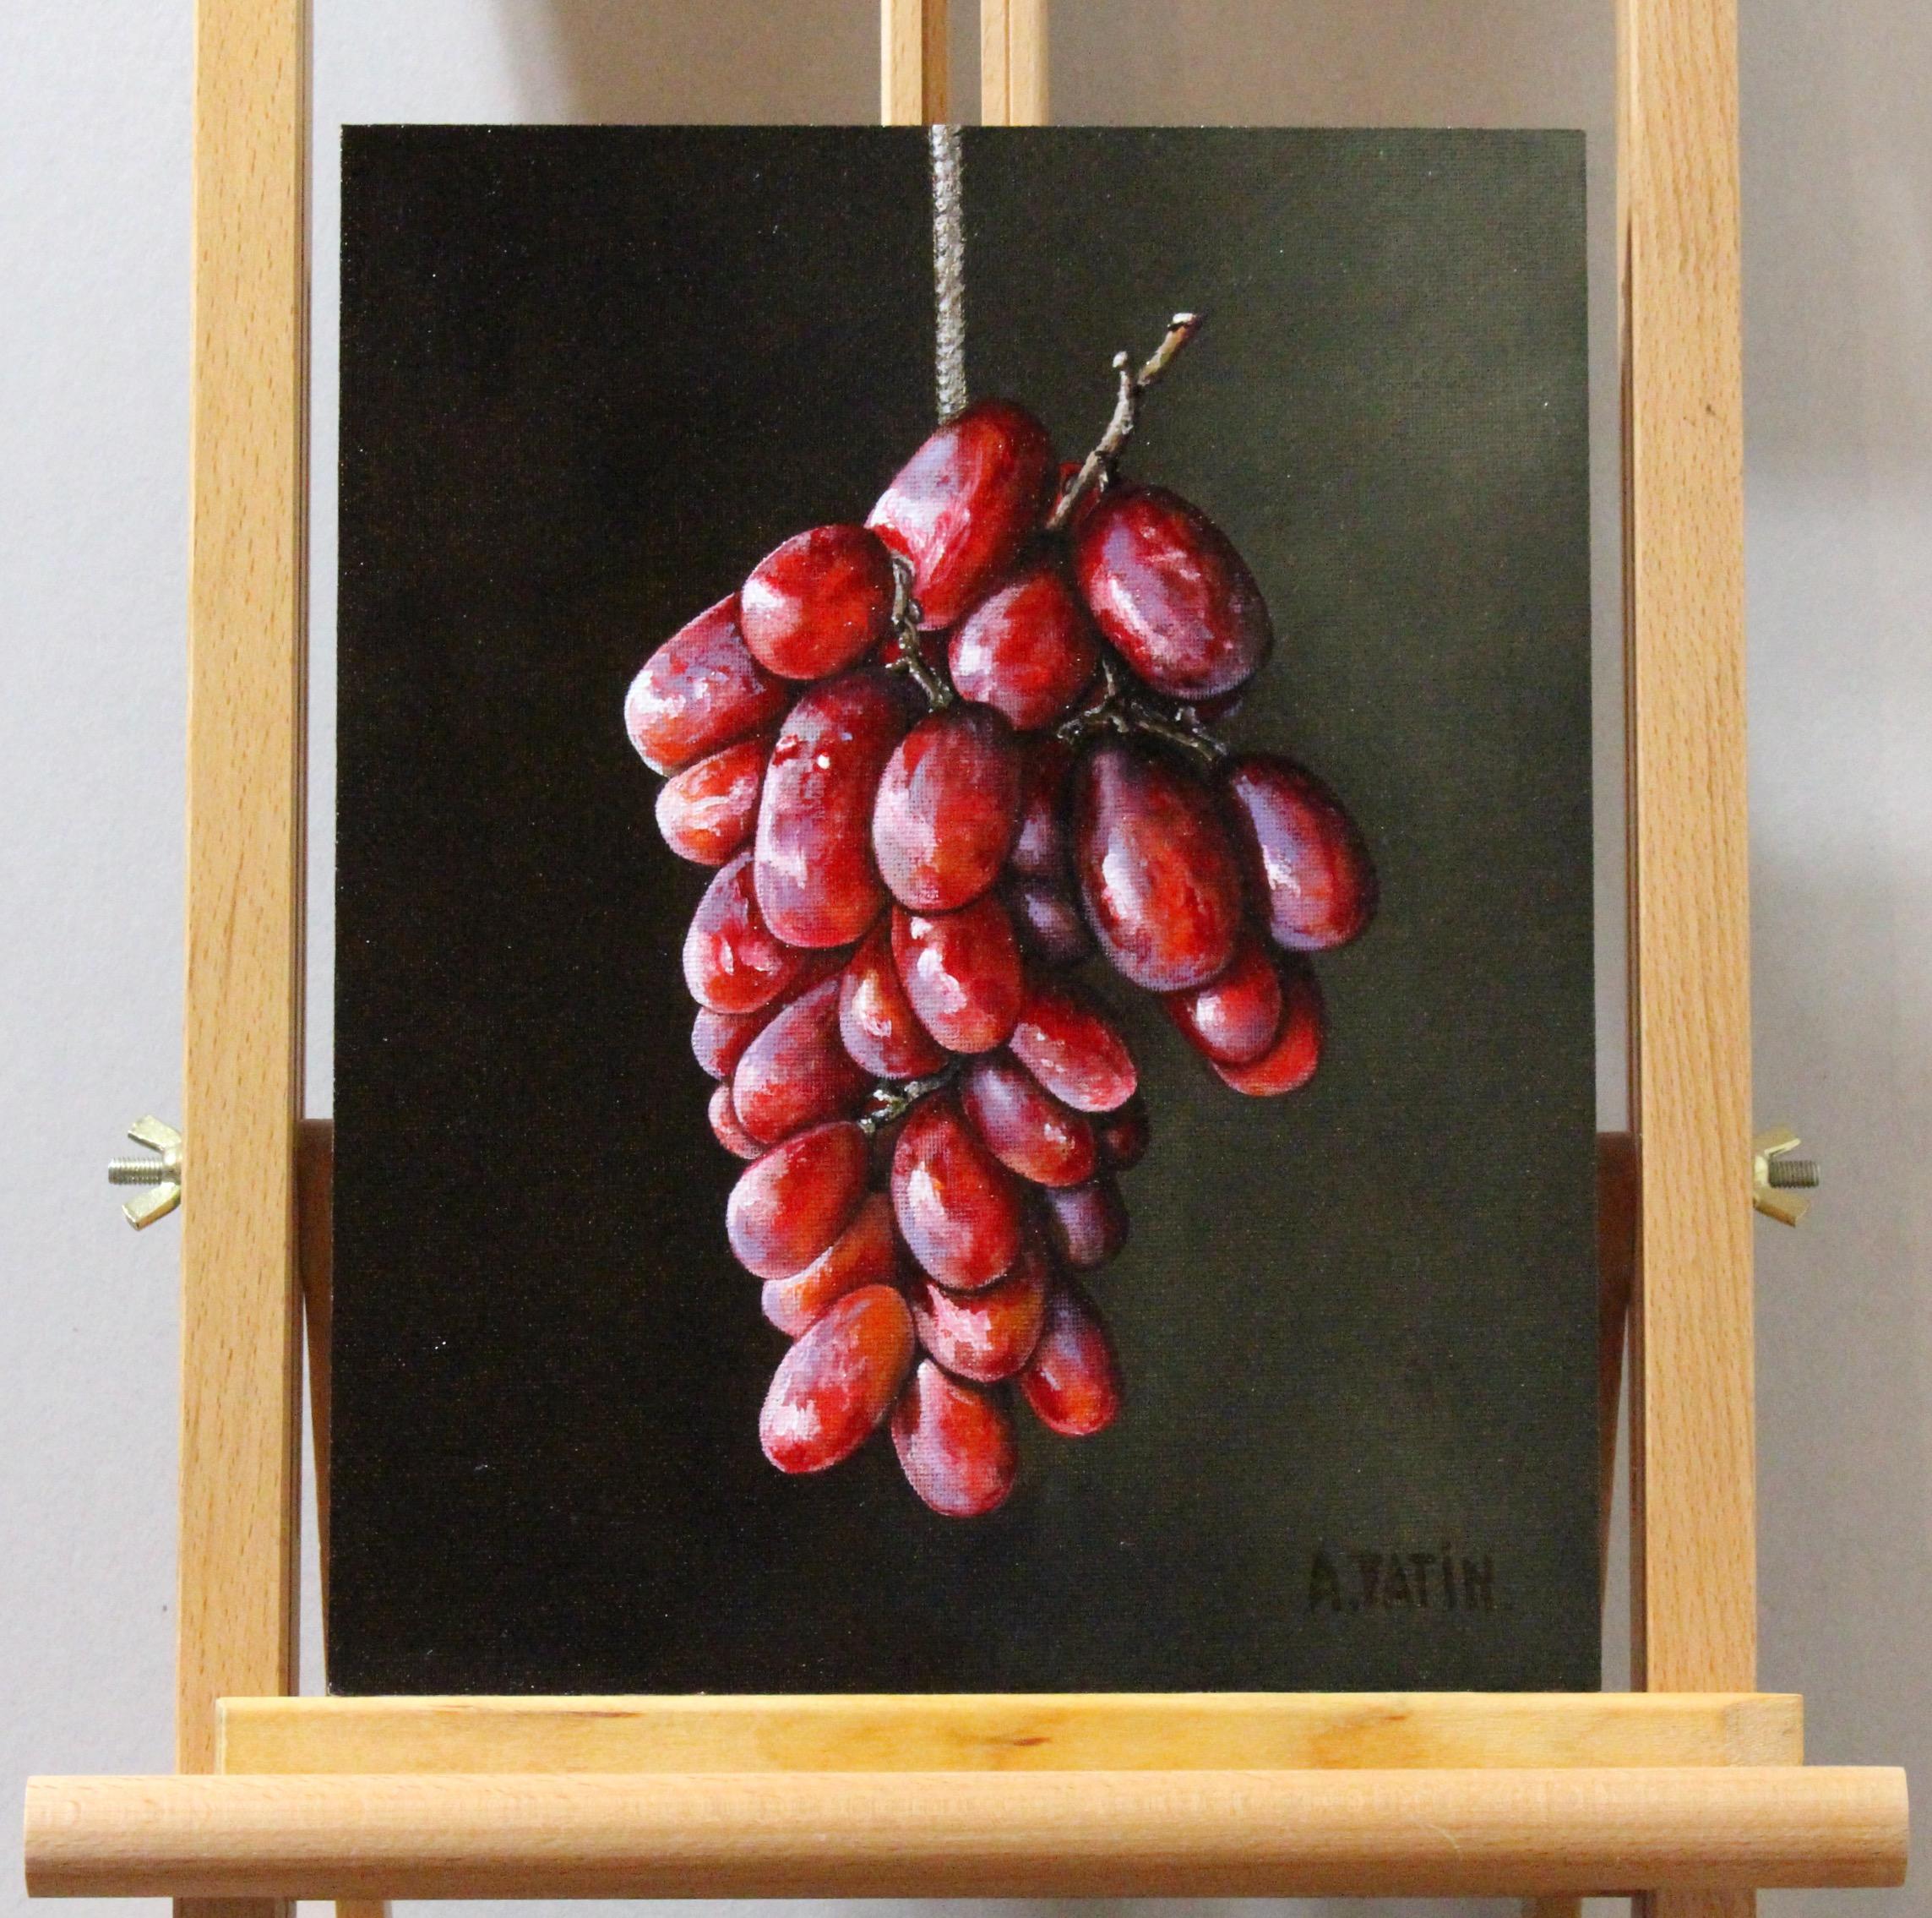 <p>Artist Comments<br>A bunch of red grapes illuminates from within, resembling tiny light bulbs. The artwork portrays their classic shape and translucency with white and purple speckles on their skin. Painted with Flemish techniques, the process